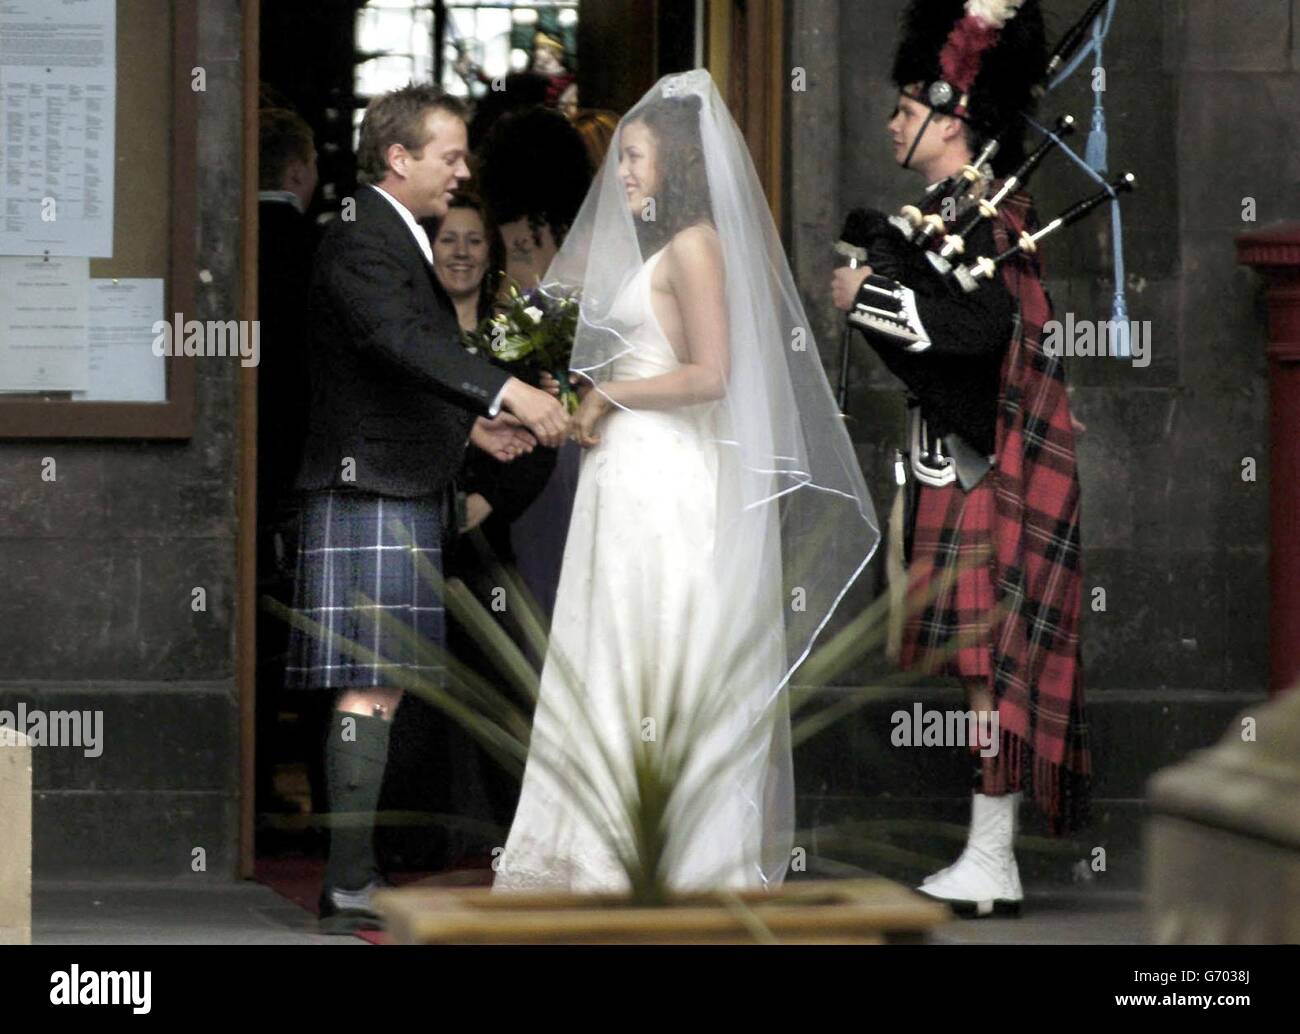 Hollywood actor Kiefer Sutherland at the wedding of his step-daughter to a Scottish actor. The star of Flatliners and cult television series 24, wore a stylish Douglas tartan kilt for the marriage of Michelle Kath, the daughter of his first wife Camelia, to actor Adam Sinclair. Sutherland chatted to fans and posed for photographs before the ceremony began at Edinburgh's City Chambers. The reception is also expected to be held in the grand city council headquarters on the Royal Mile. Stock Photo